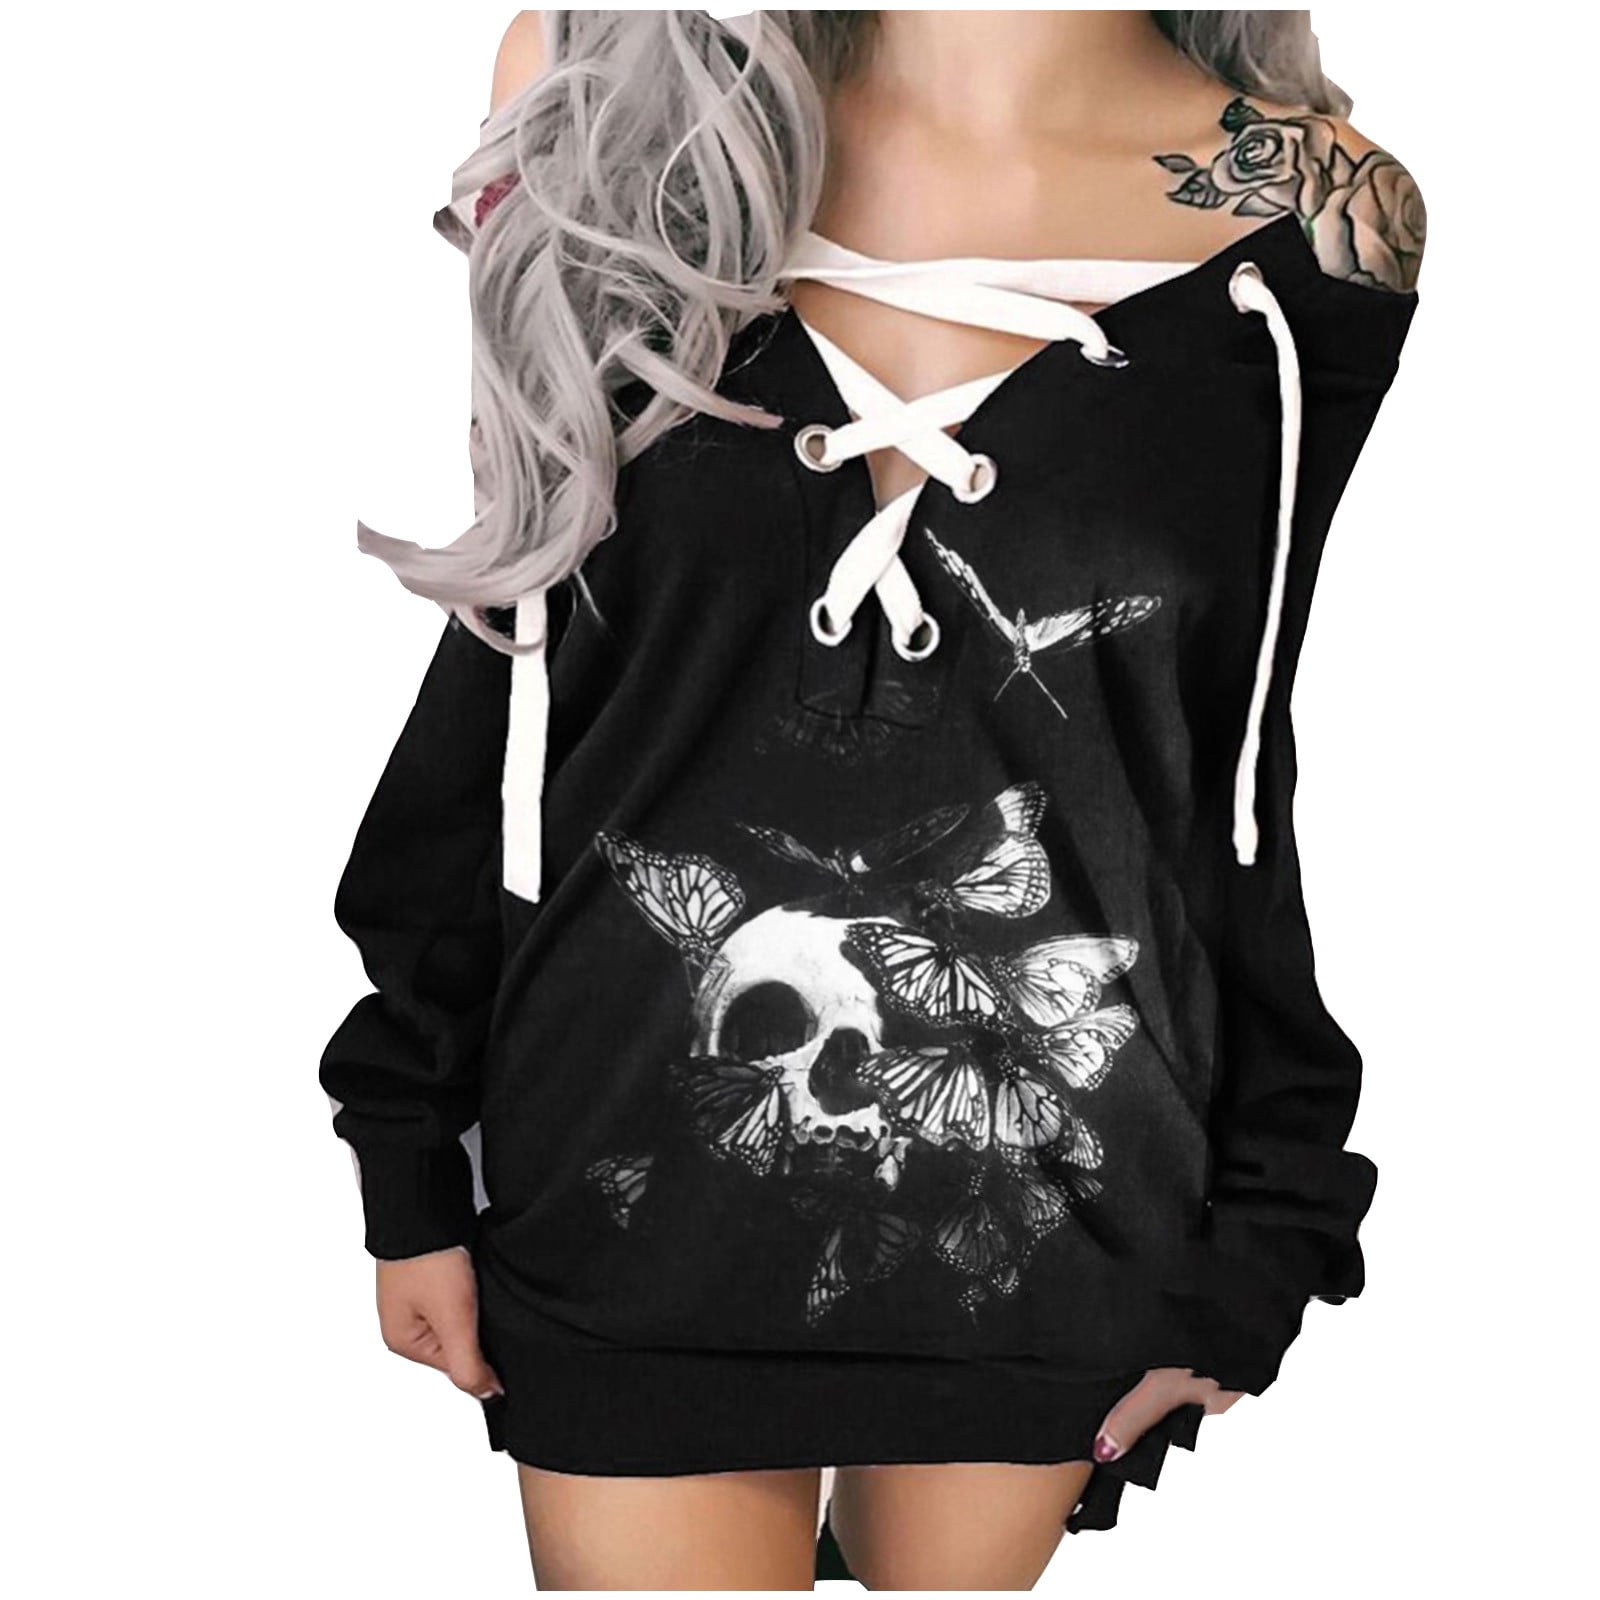 Staron Womens Skull Printed Casual Tank Top Halloween O-Neck Lace Sleeveless T-Shirt Loose Pullover Tops 